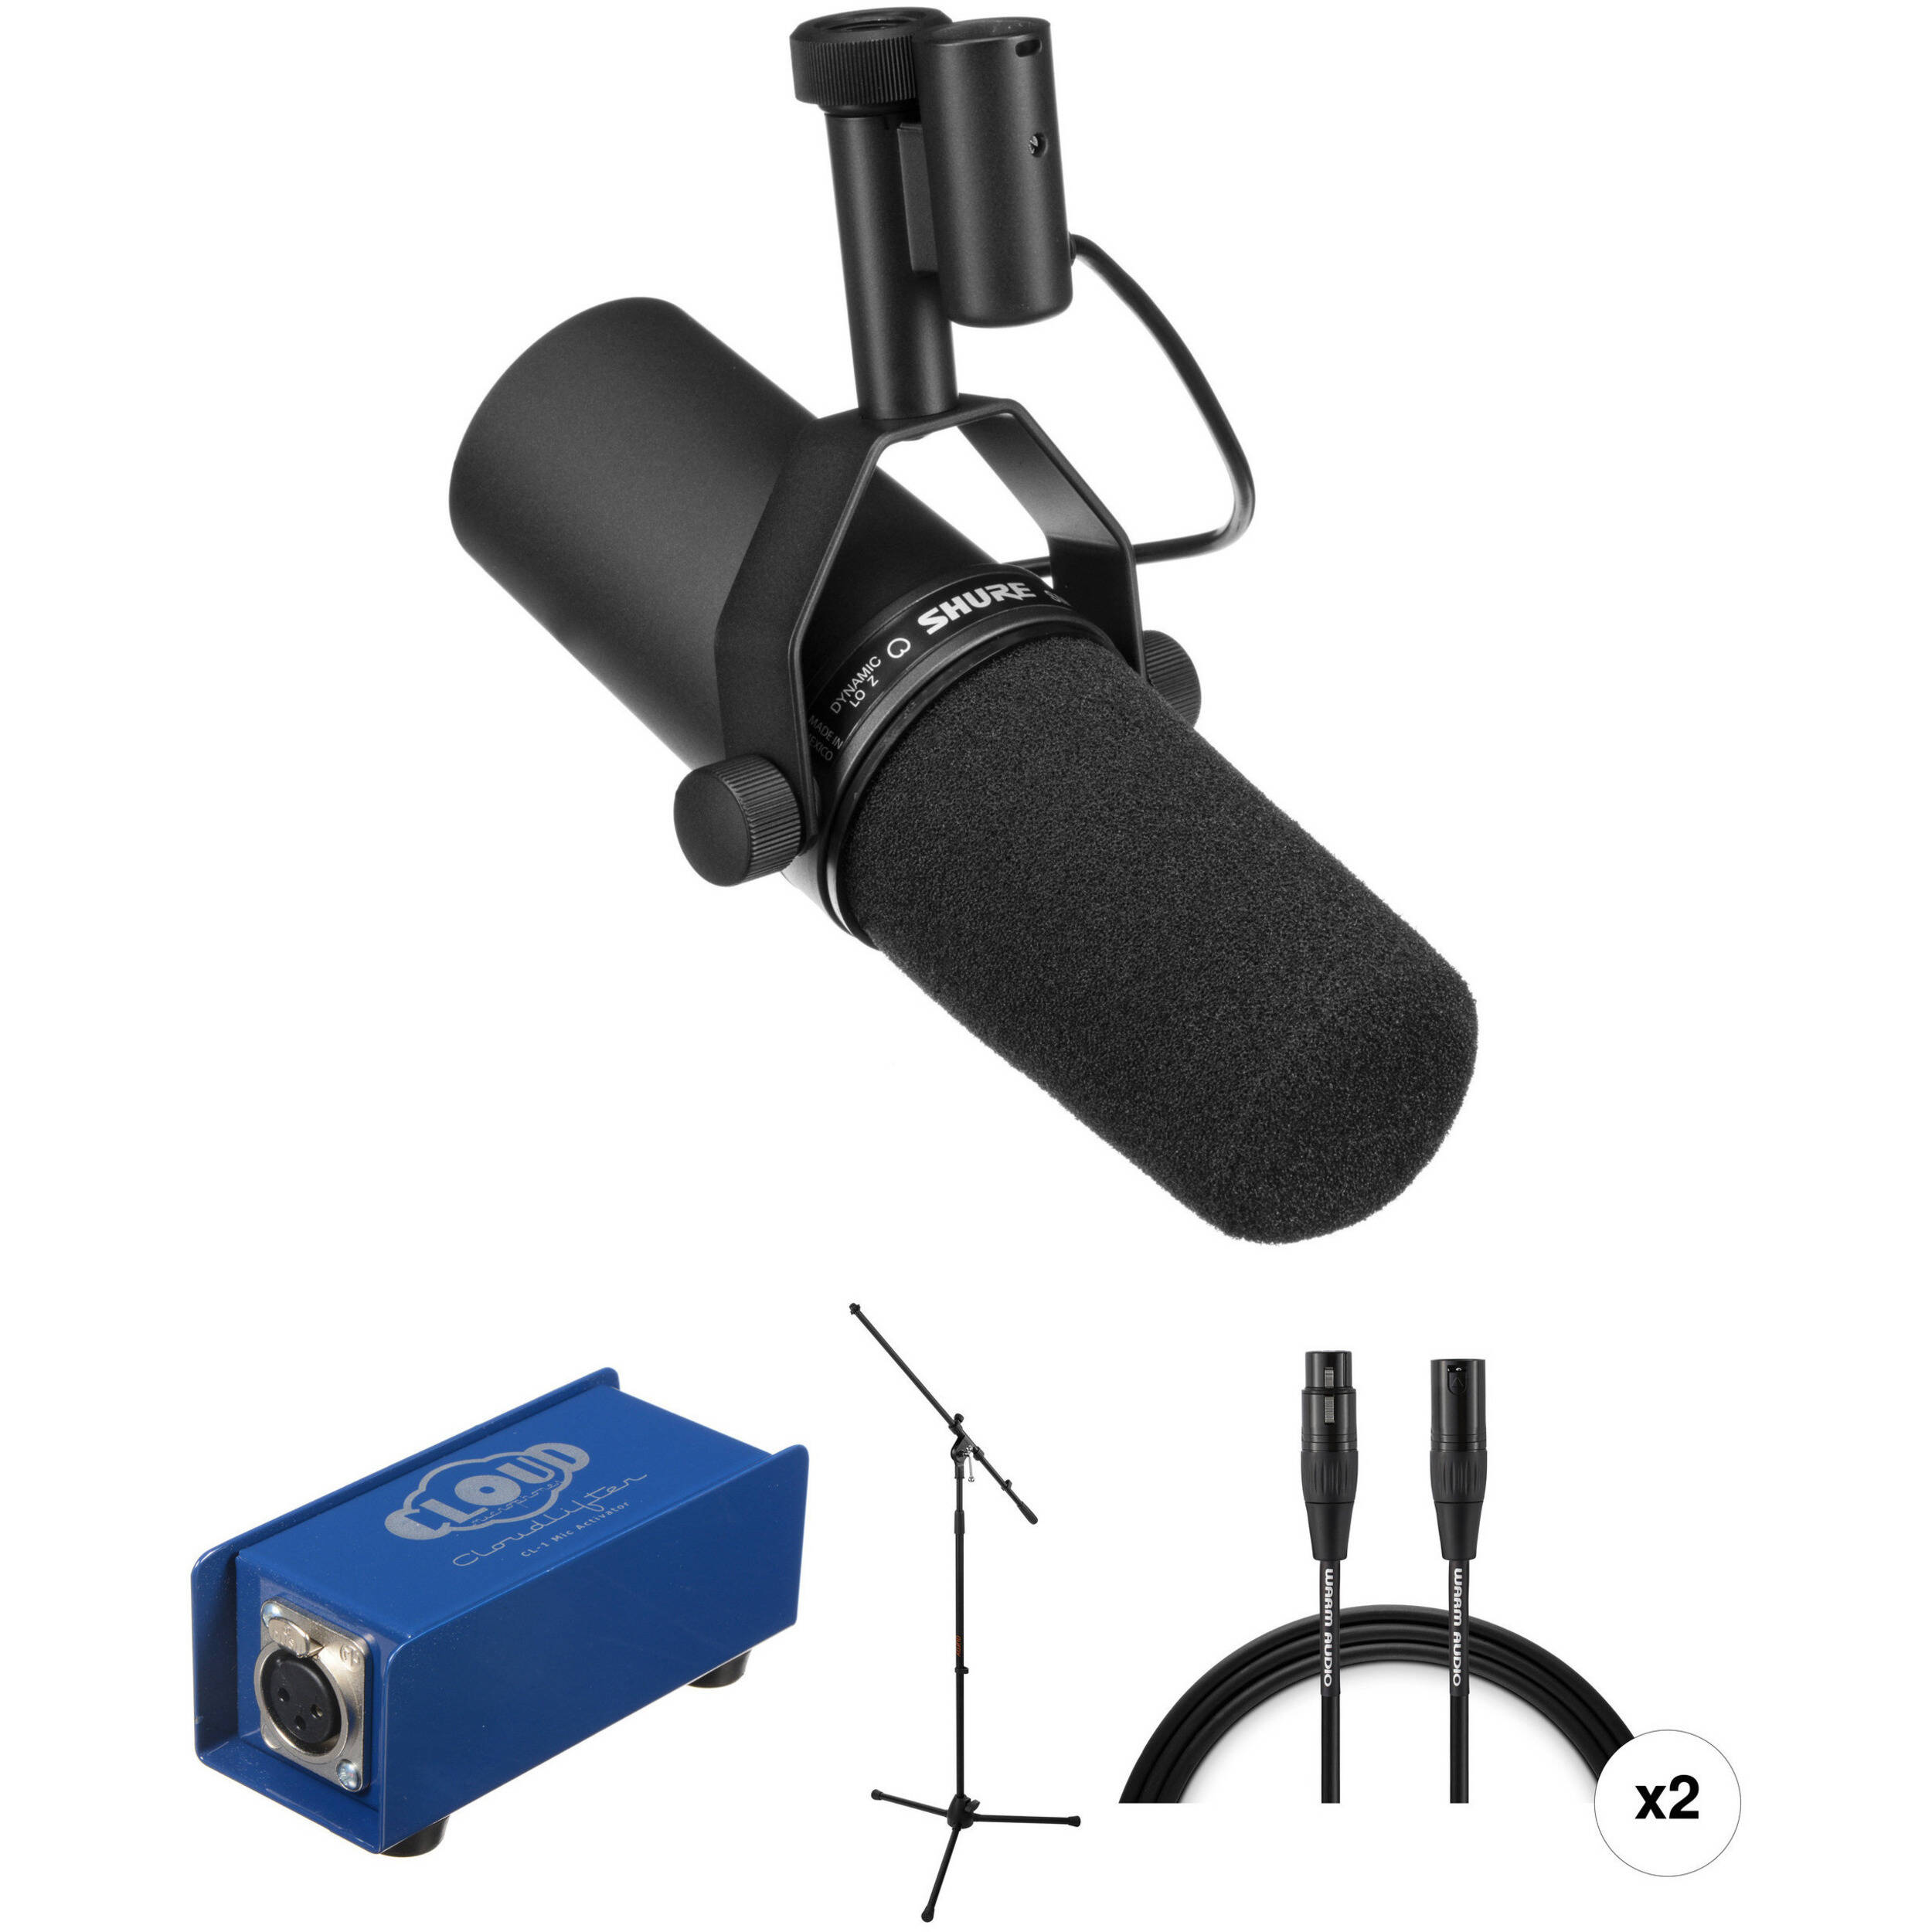 Shure Sm7b Microphone Kit With Cloudlifter Mic Stand And Mic